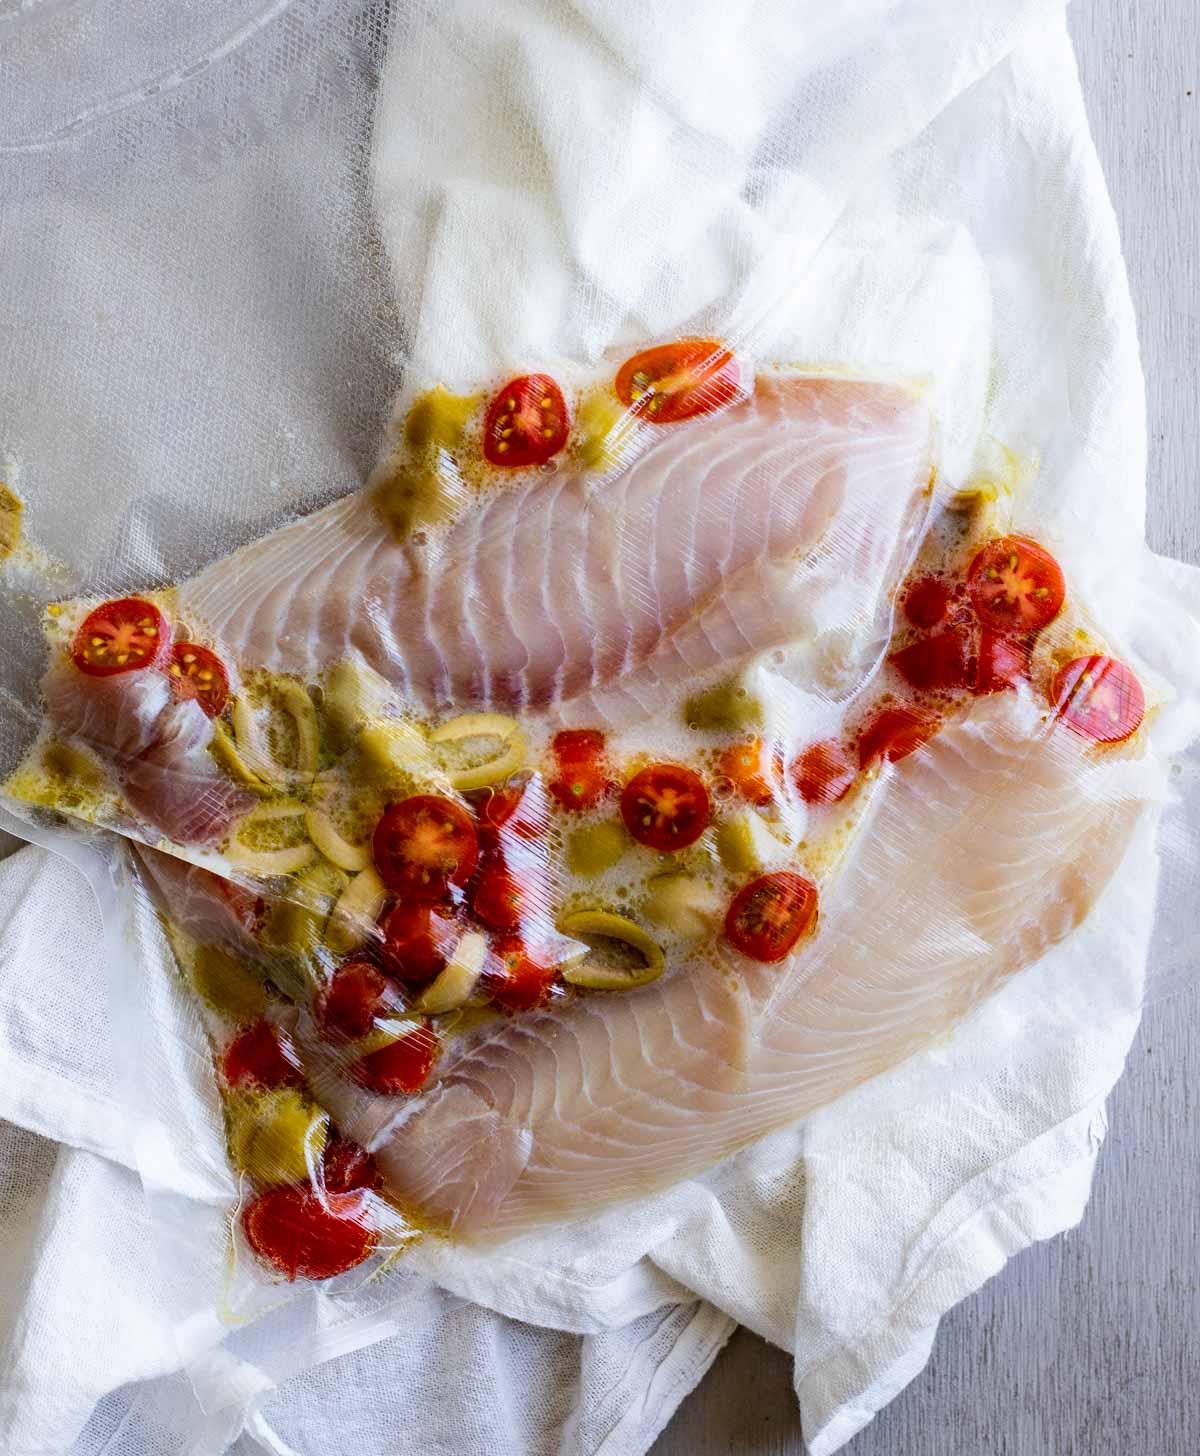 Tilapia fillets sealed in a bag with tomatoes, olives, wine and oil.